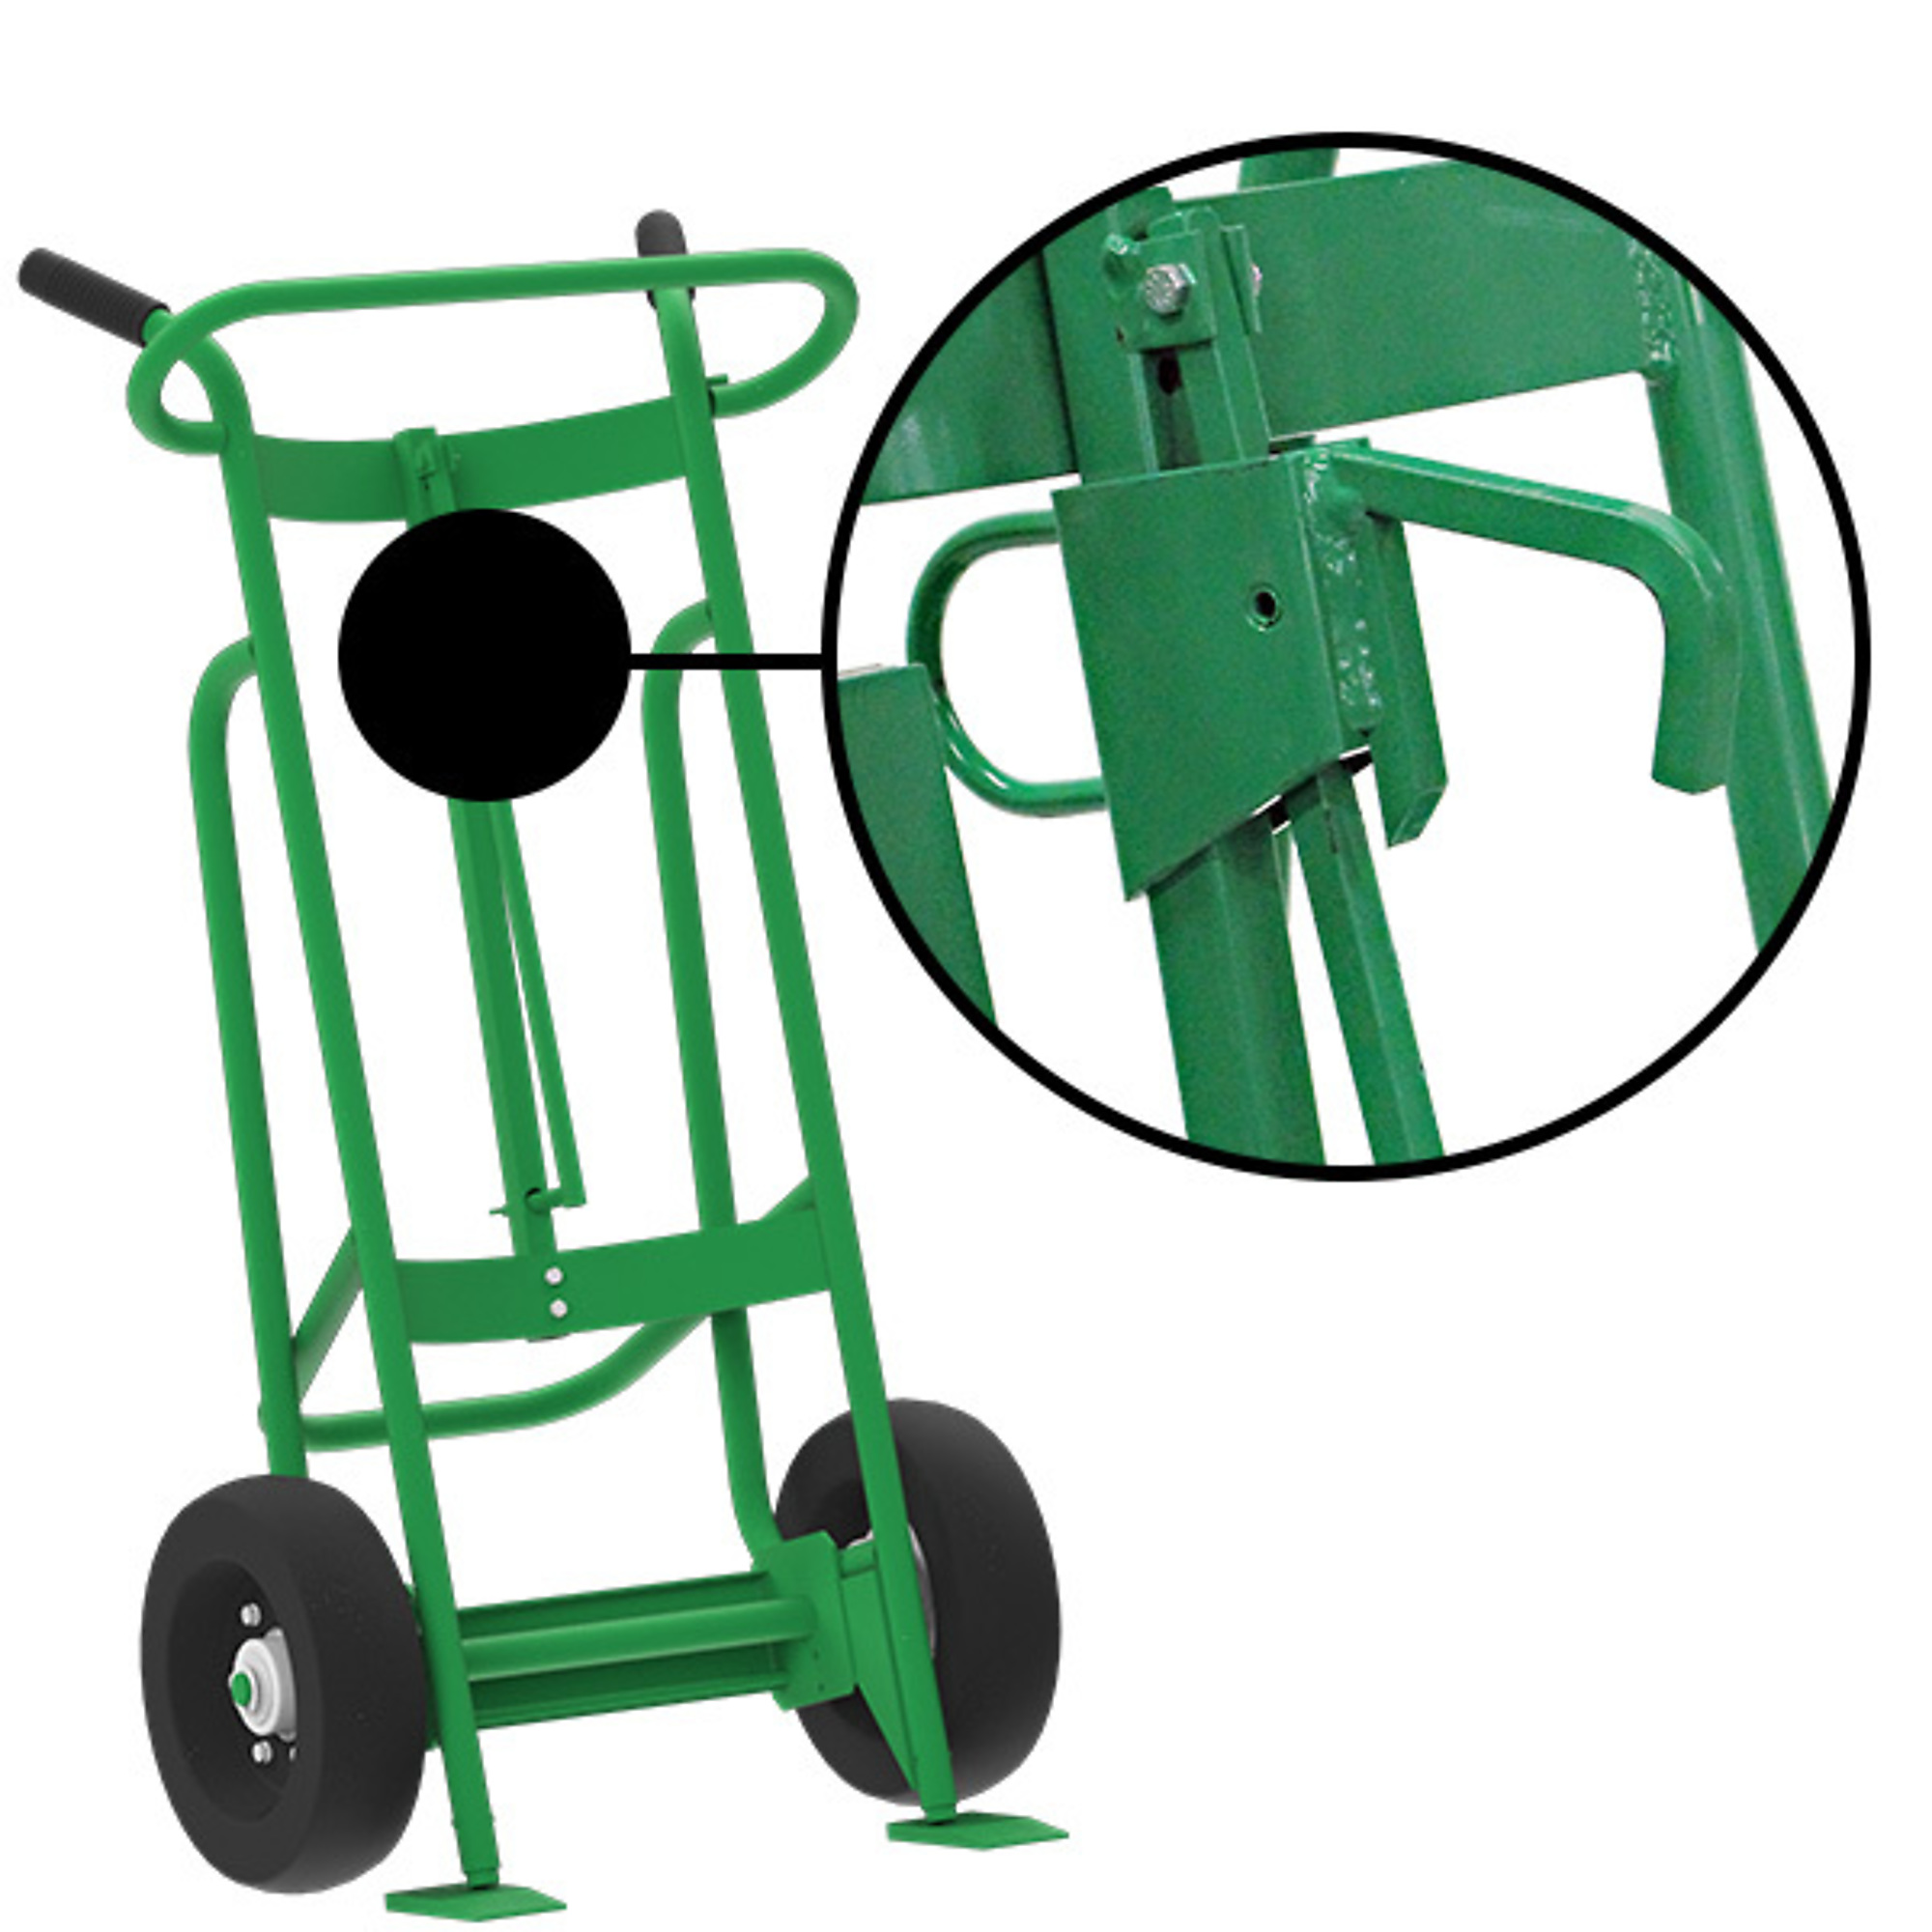 Valley Craft, 2-Wheel Drum Hand Truck, Load Capacity 1000 lb, Height 52 in, Material Steel, Model F82025A4L